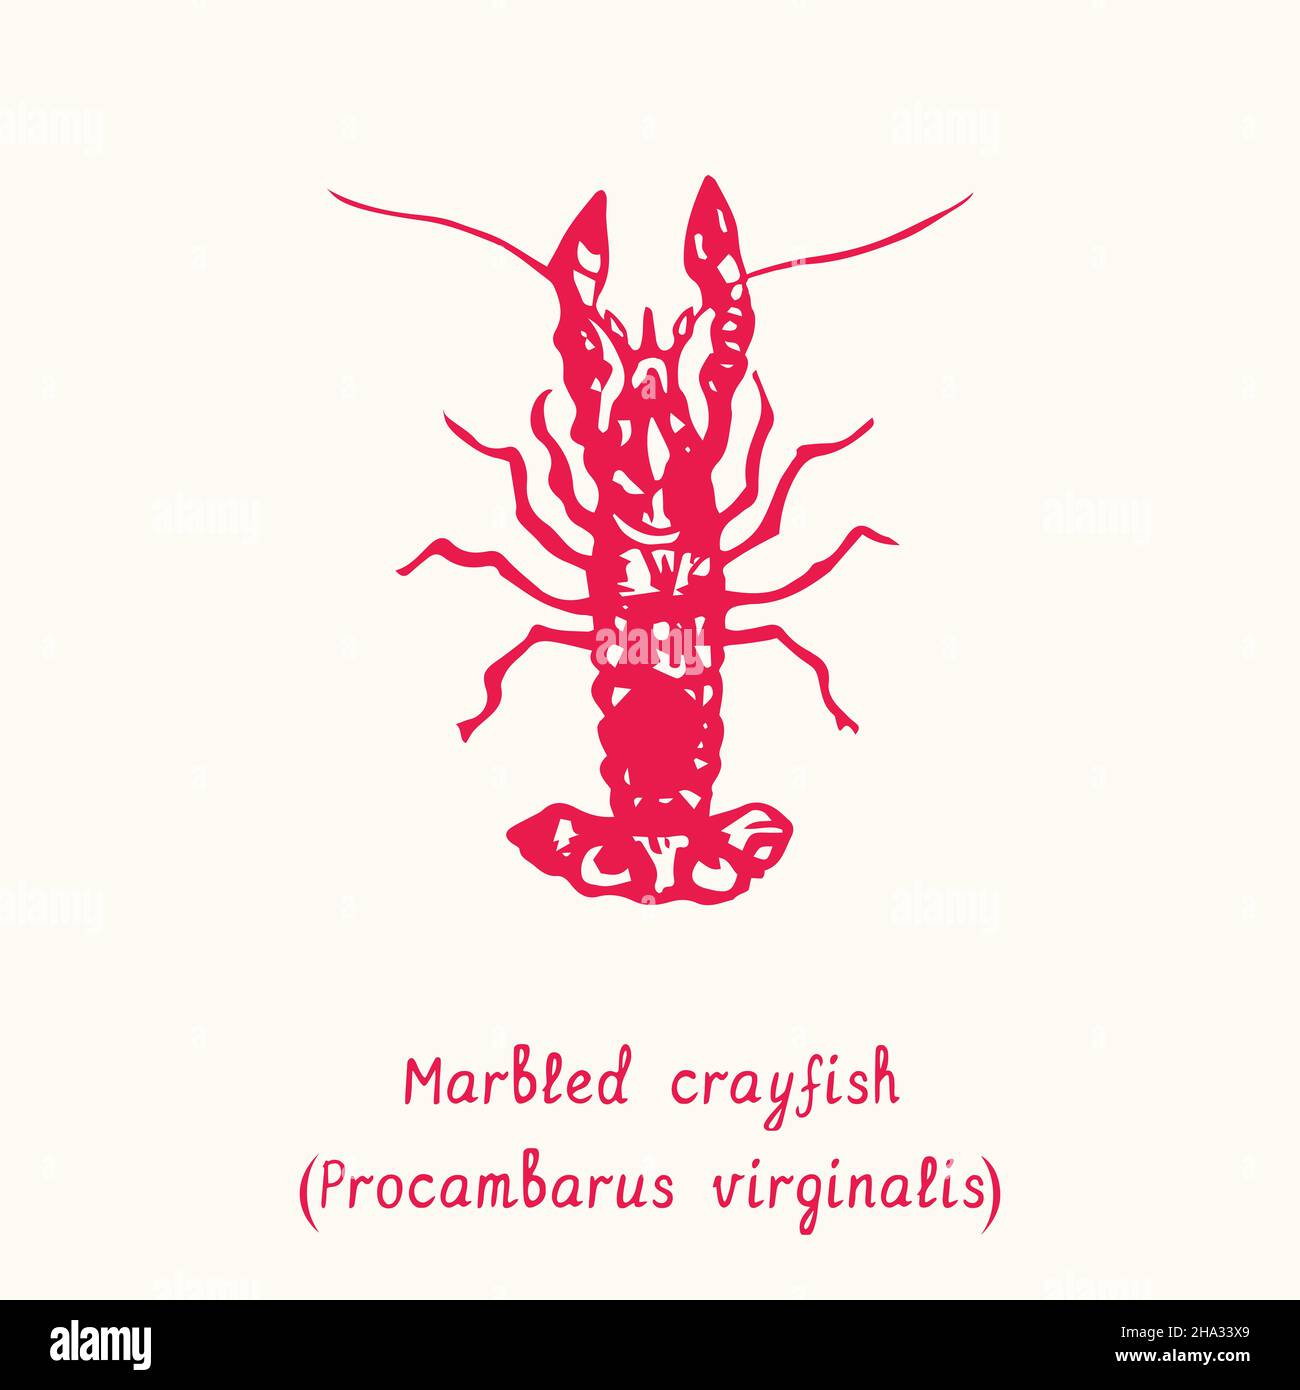 Marbled crayfish (Procambarus virginalis) top view. Ink black and white doodle drawing in woodcut style with inscription. Stock Photo